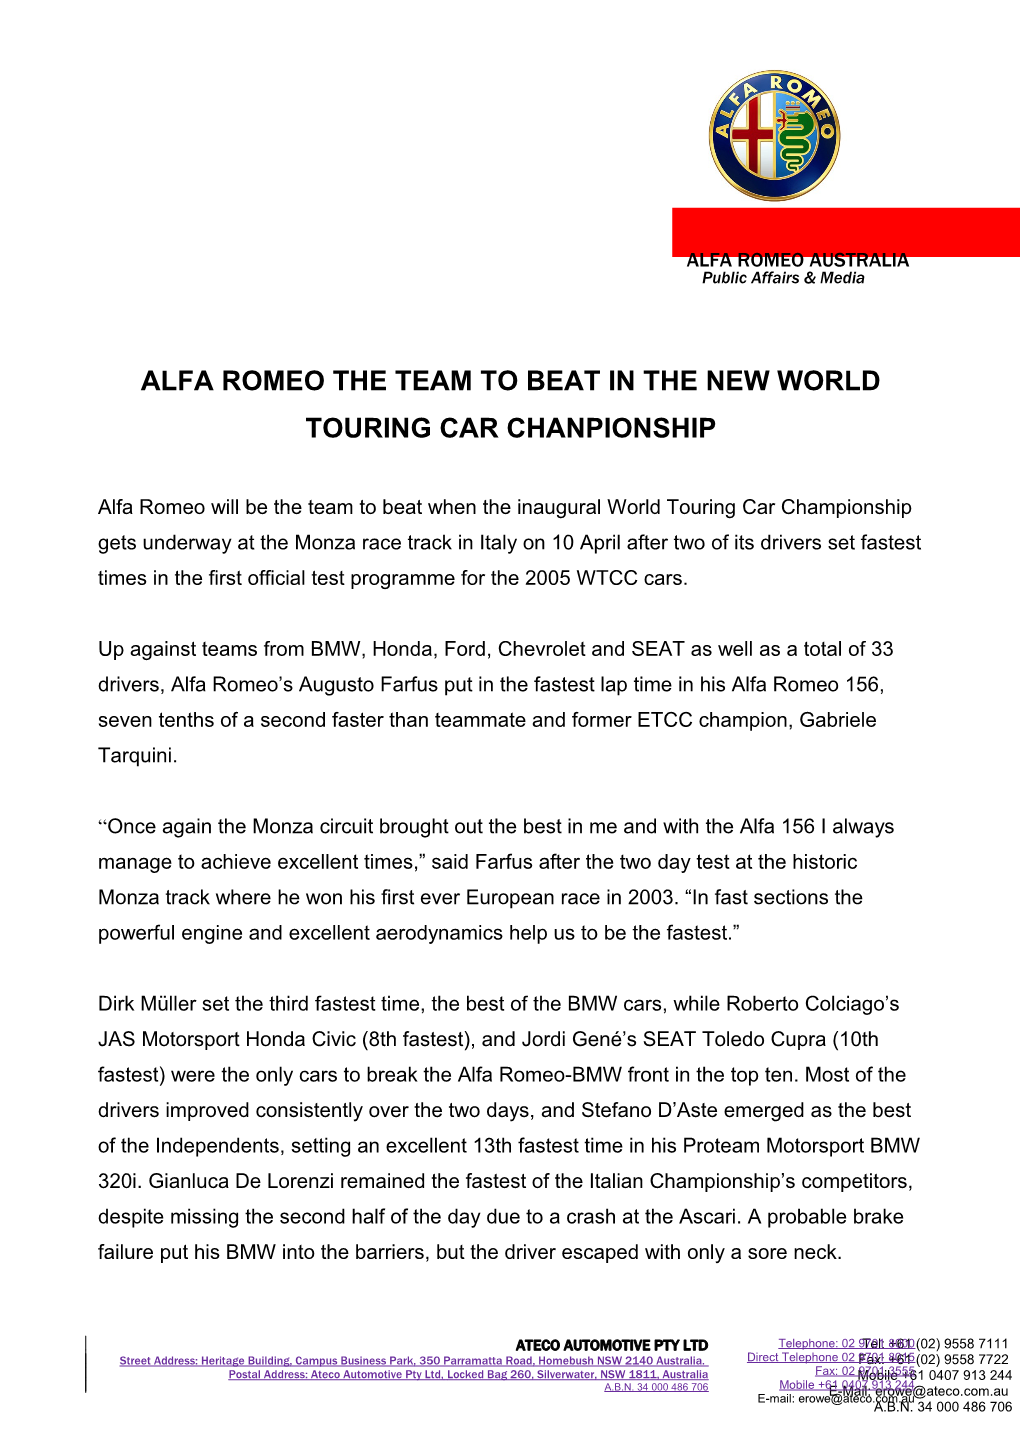 Alfa Romeo the Team to Beat in the New World Touring Car Chanpionship